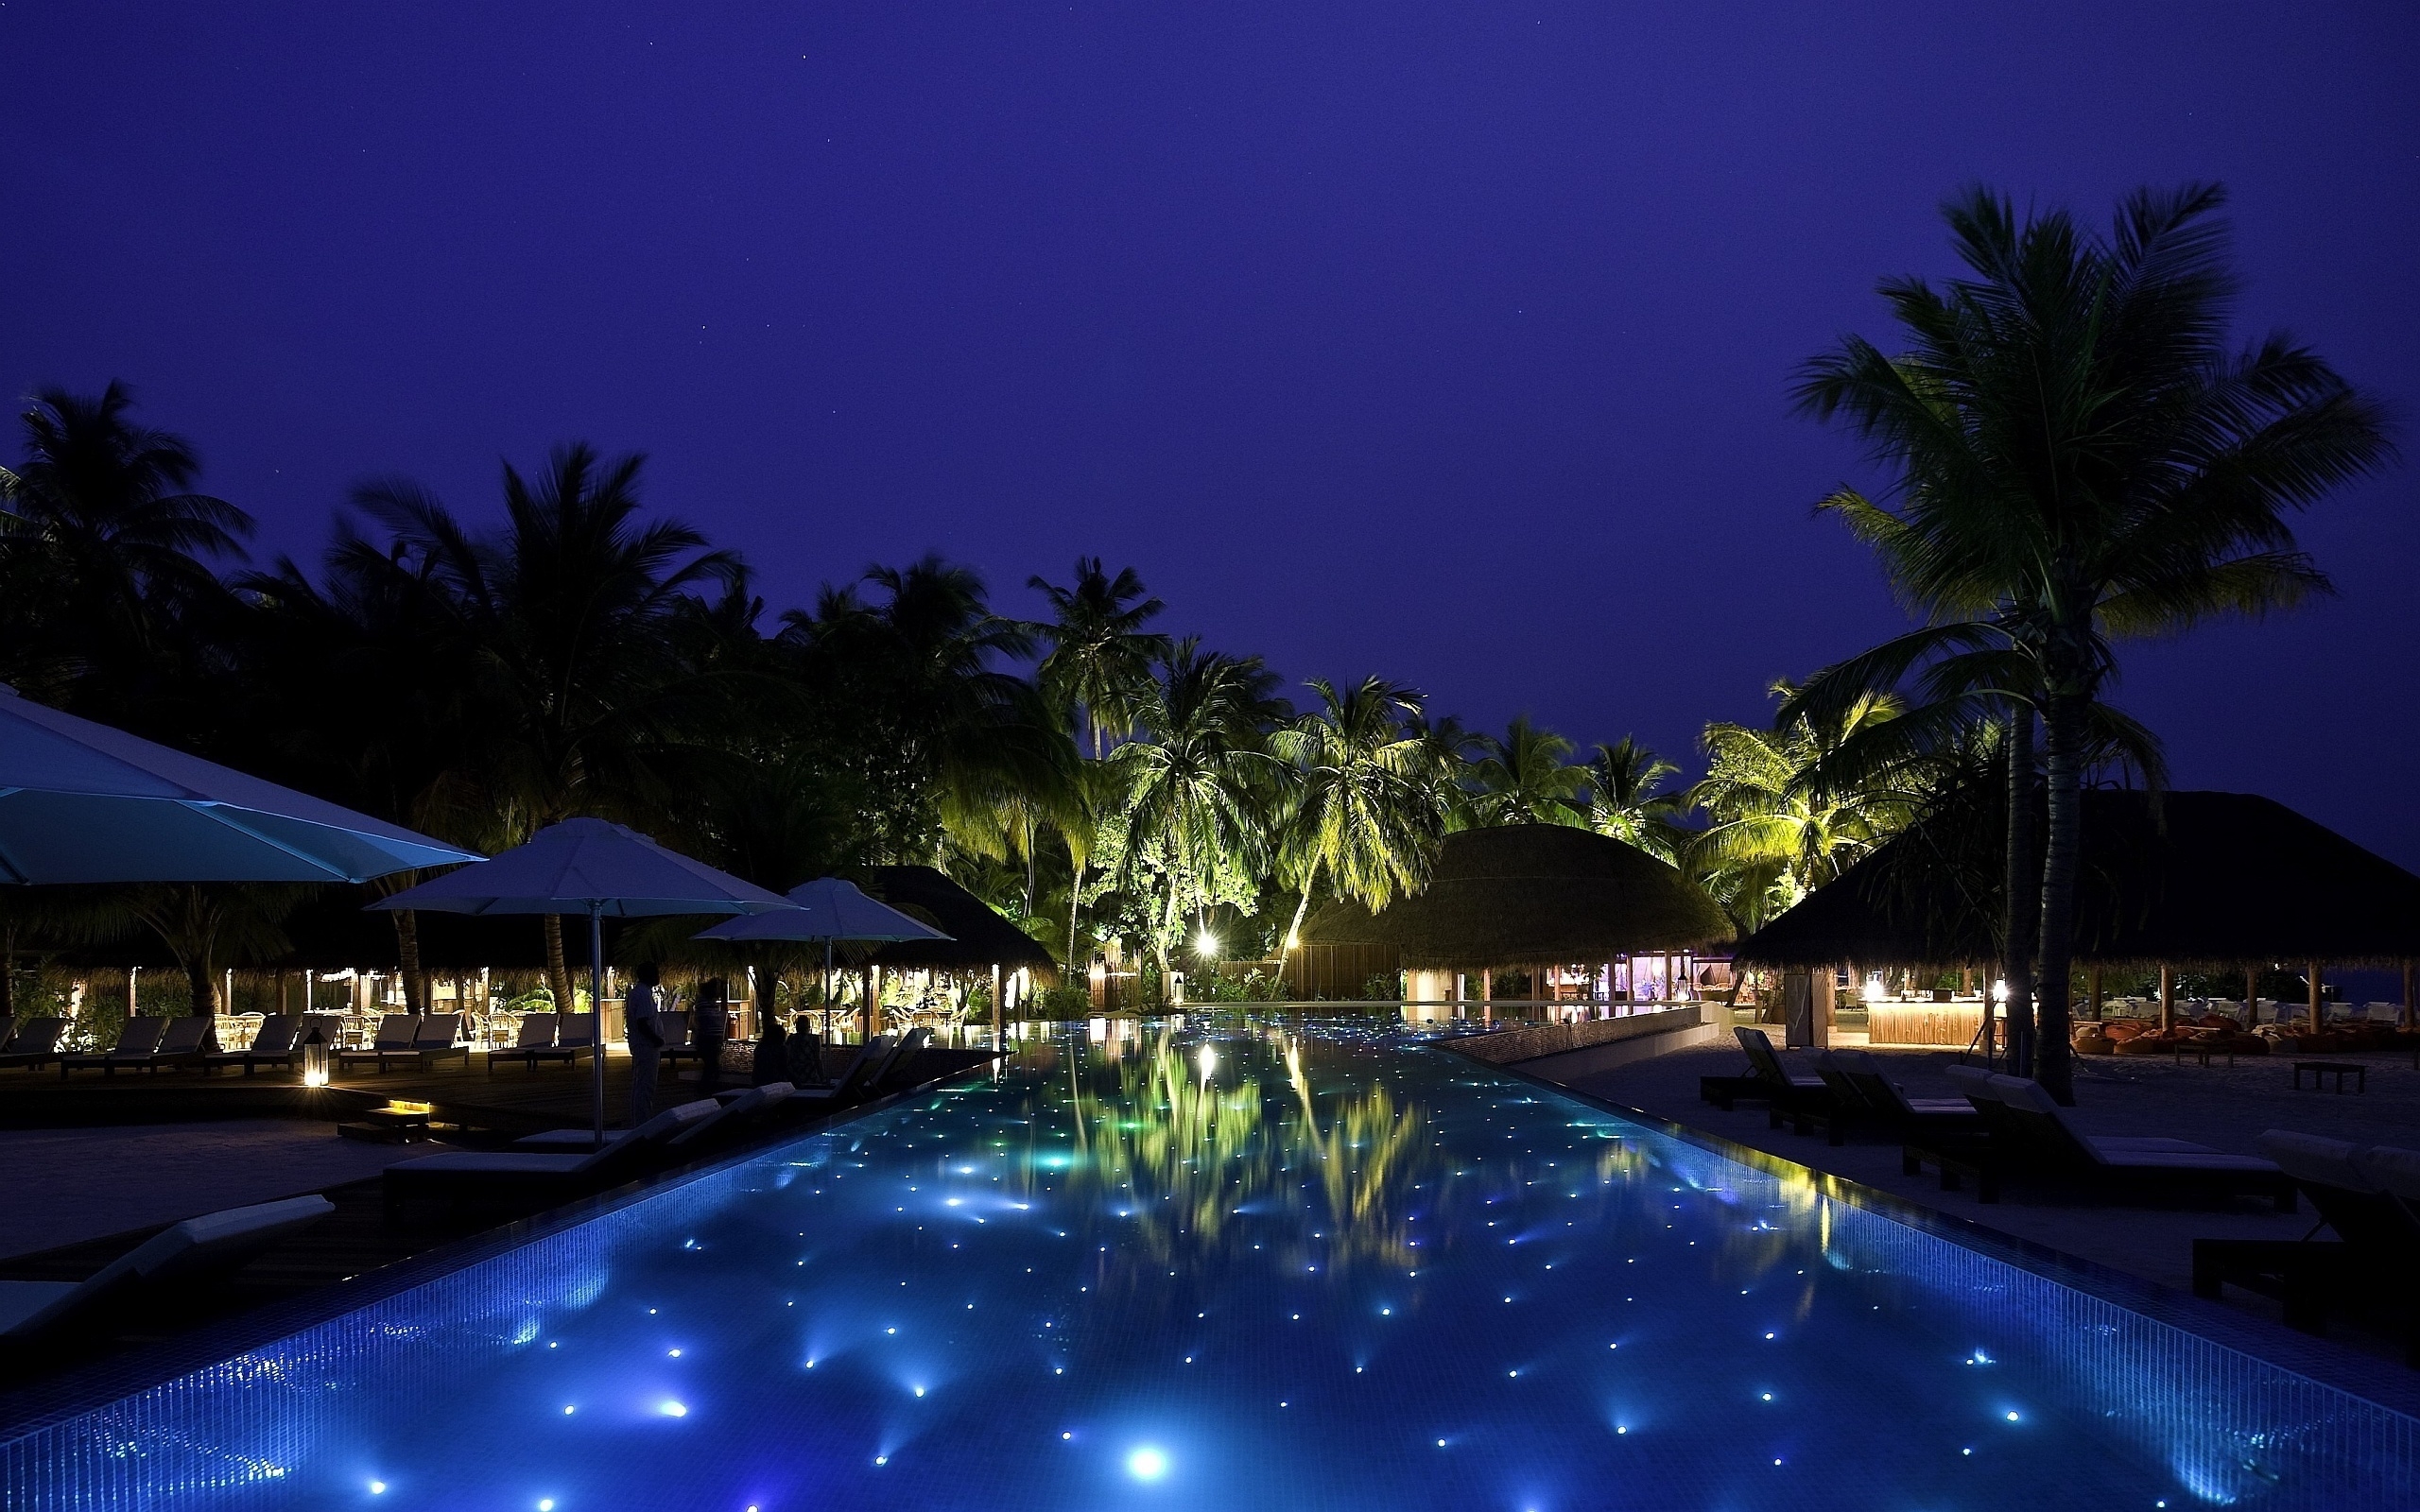 Resort Night View for 2560 x 1600 widescreen resolution